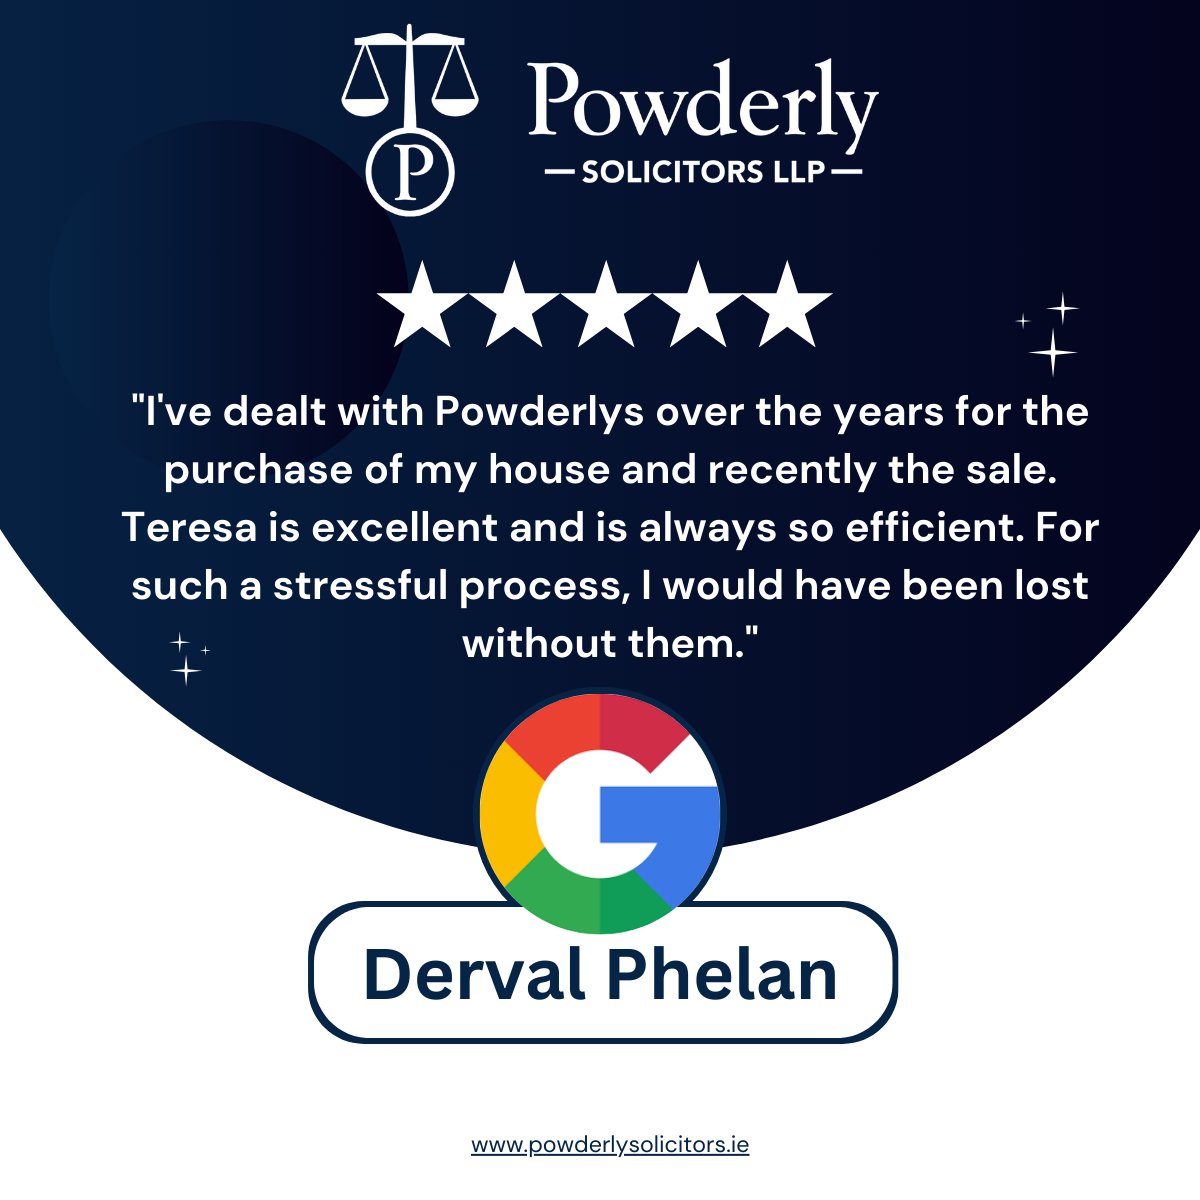 Huge thank you to Derval Phelan for your wonderful 5 Star Review on Google for Powderly Solicitors. Delighted you're happy with our service & proud to share your comments #CustomerExperience #irishlawyer #legalservices #legaladvice See more reviews here: bit.ly/3OV31y5